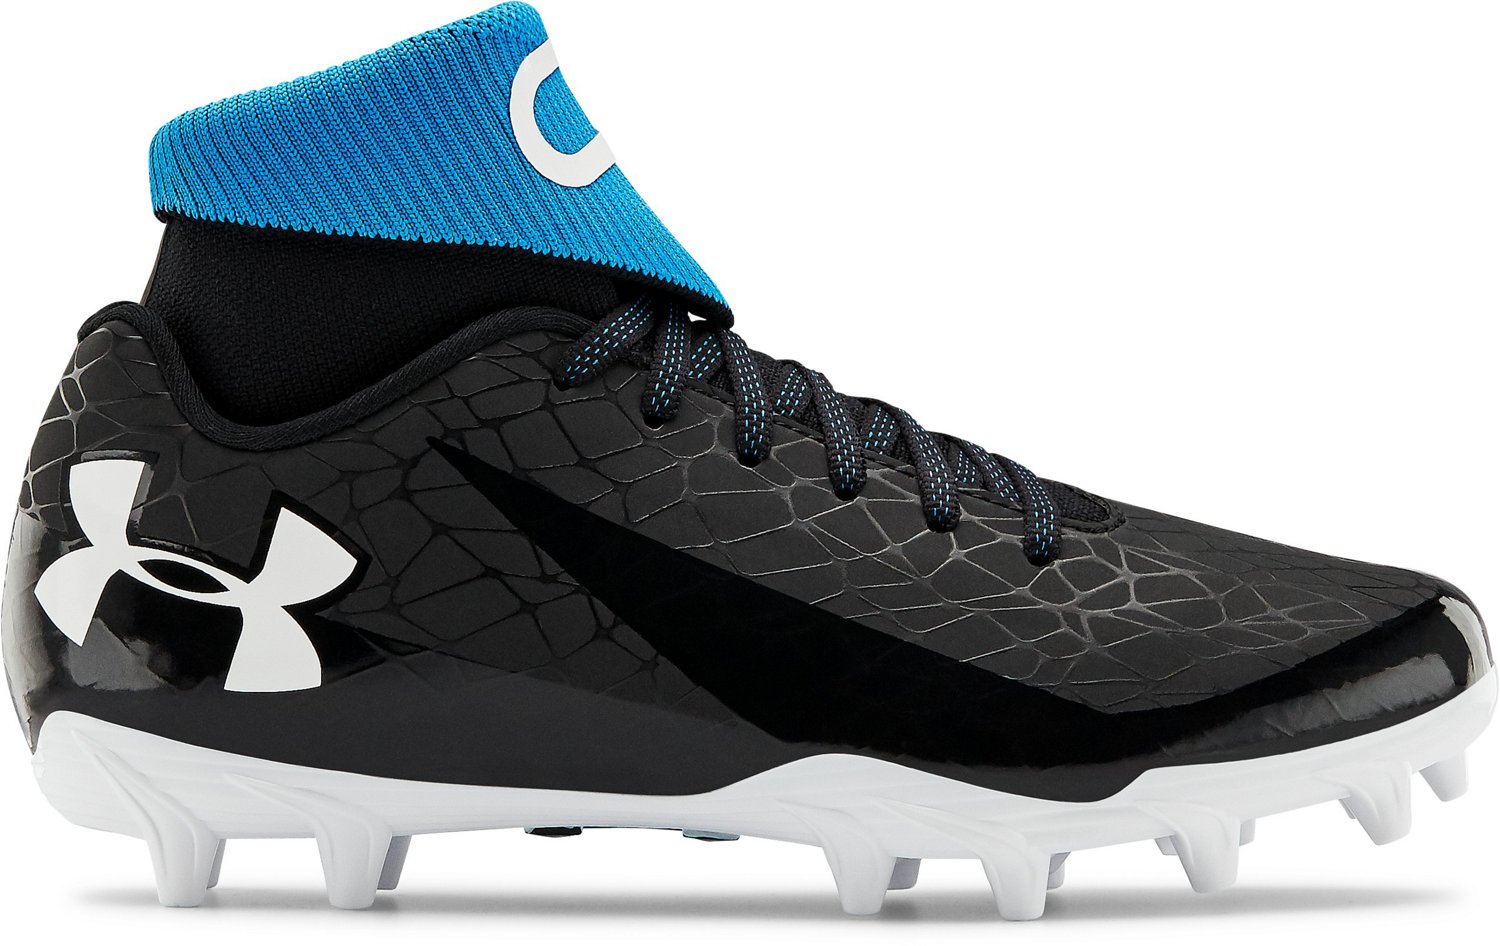 cam newton cleats for kids